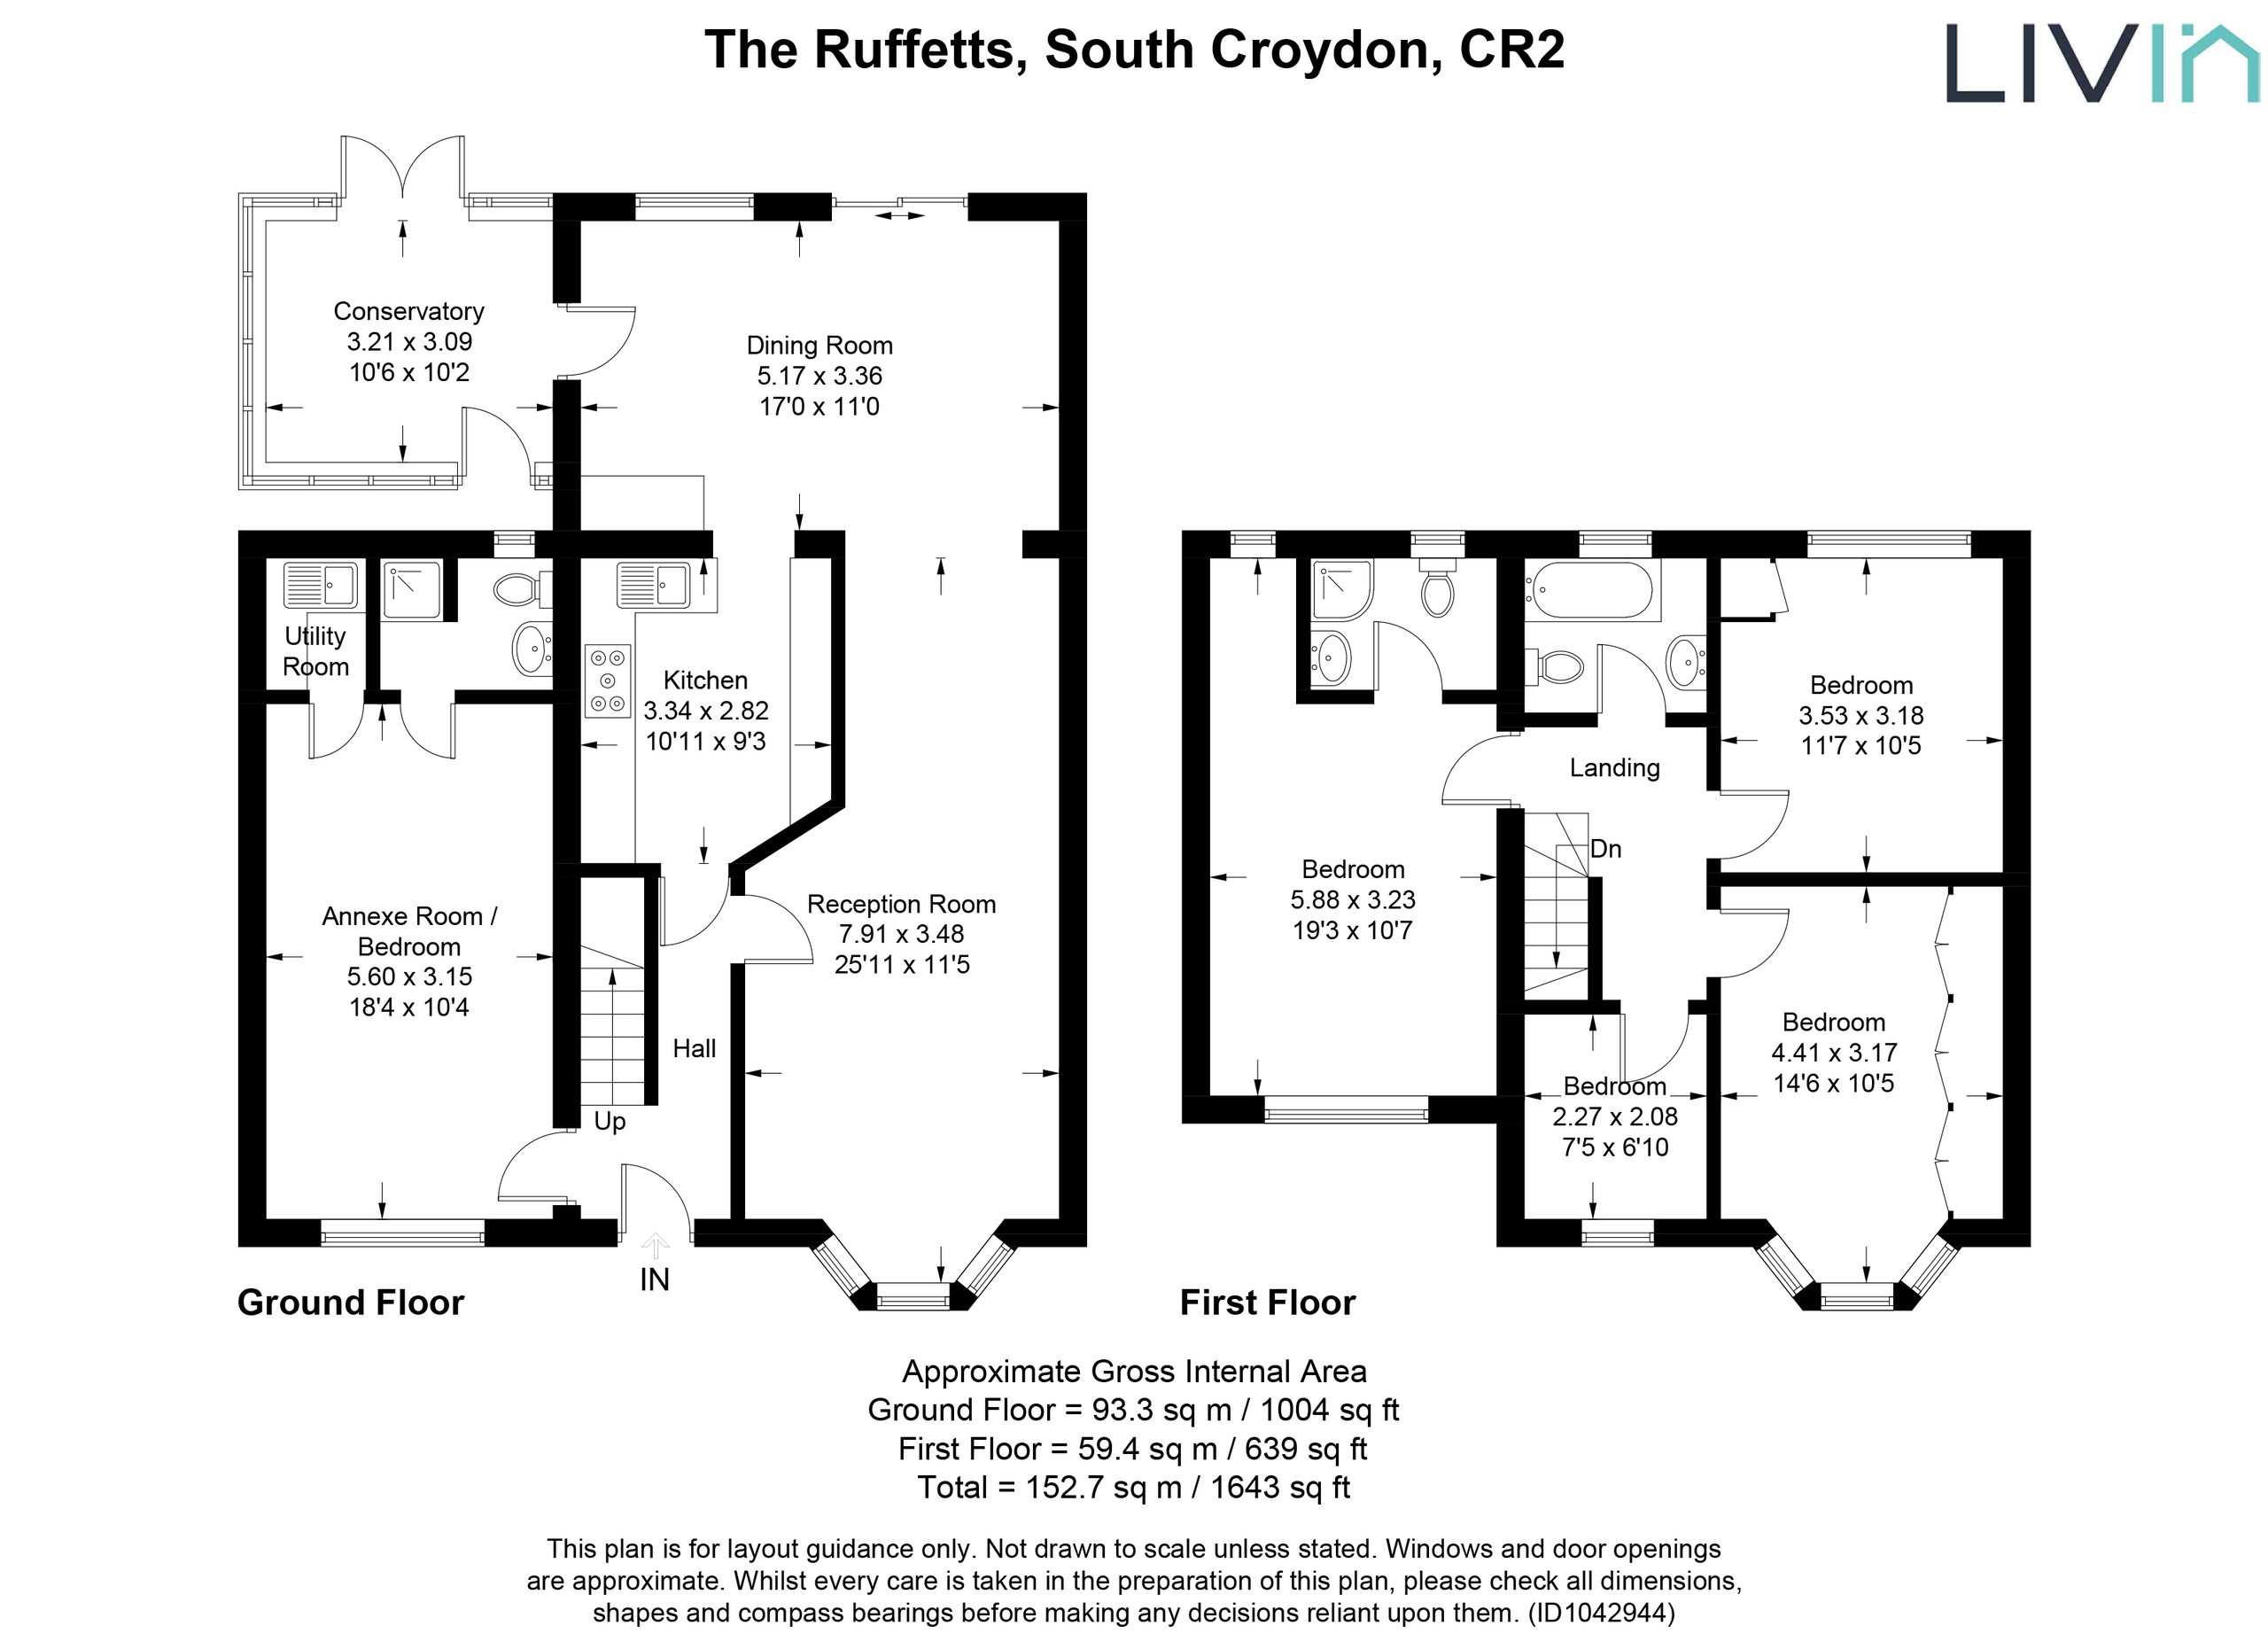 5 bed semi-detached house for sale in The Ruffetts, South Croydon - Property floorplan